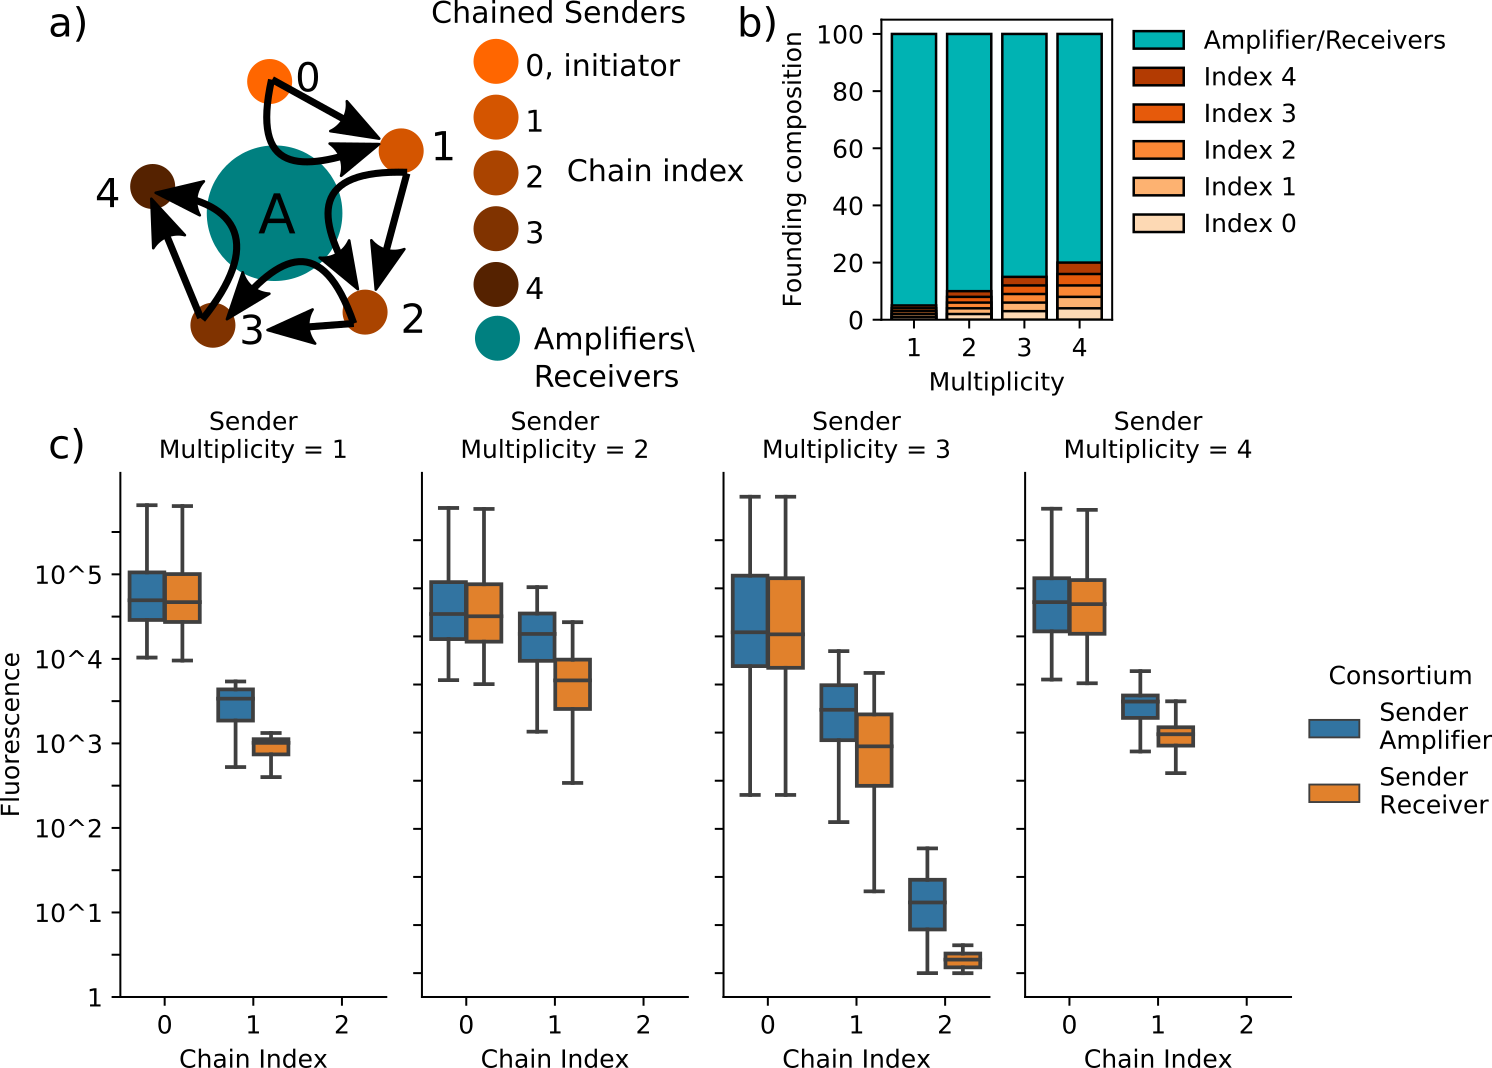 Hypothetical consortia composed of amplifiers/receivers and chained sender cells are simulated to evaluate how amplifying cell-cell signaling can benefit information propagation. (a) depicts a schematic representing the cell-cell signaling relationships represented in these simulations. The chained senders are connected by unidirectional, sender-receiver relationships in which chain index \(i\) emits signal molecules that activate synthase expression in chain index \(i+1\). The index 0 population are constitutively active. Each sender-receiver relationship employs unique, orthogonal signaling species Amplifiers, however, can amplifify the signaling activity at each index. Simulations vary the bystander cells’ status as amplifier or receiver and the composition of the founding consortia populations, which is described in (b). Sender multiplicity is the number of founding cells of each of the sender populations. Because the founding population is set at 100 individuals, higher multiplicity reduces the total number of amplifier/receiver cells in the founding population. The benefit provided by amplification is measured by comparing the maximum synthase amount in each sender population achieved during simulations including either amplifiers or receivers as partners to the chained senders. Receivers do not respond to signaling activity, but they occupy space and consume nutrients. (c) depicts, in boxplots, the distributions of sender activity at each index of the sender chain obtained over ten simulations of each consortium. Simulations of chain/amplifier and chain/receiver consortia utilize the same initial conditions such that the comparisons of the distributions are not confounded. In all assayed conditions, utilizing parameters governing gene networks and cell growth in B.1, the amplifiers increase the response in chain indices greater than 0. However, the response in all multiplicities except 2 is significantly diminished in comparison to the constitutively-active index 0 senders and the response from chain indices greater than 1 is negligible in all cases. Together, these data suggest that even with amplifier cells, a chained signaling cascade between minority populations is unlikely succeed past a single step.